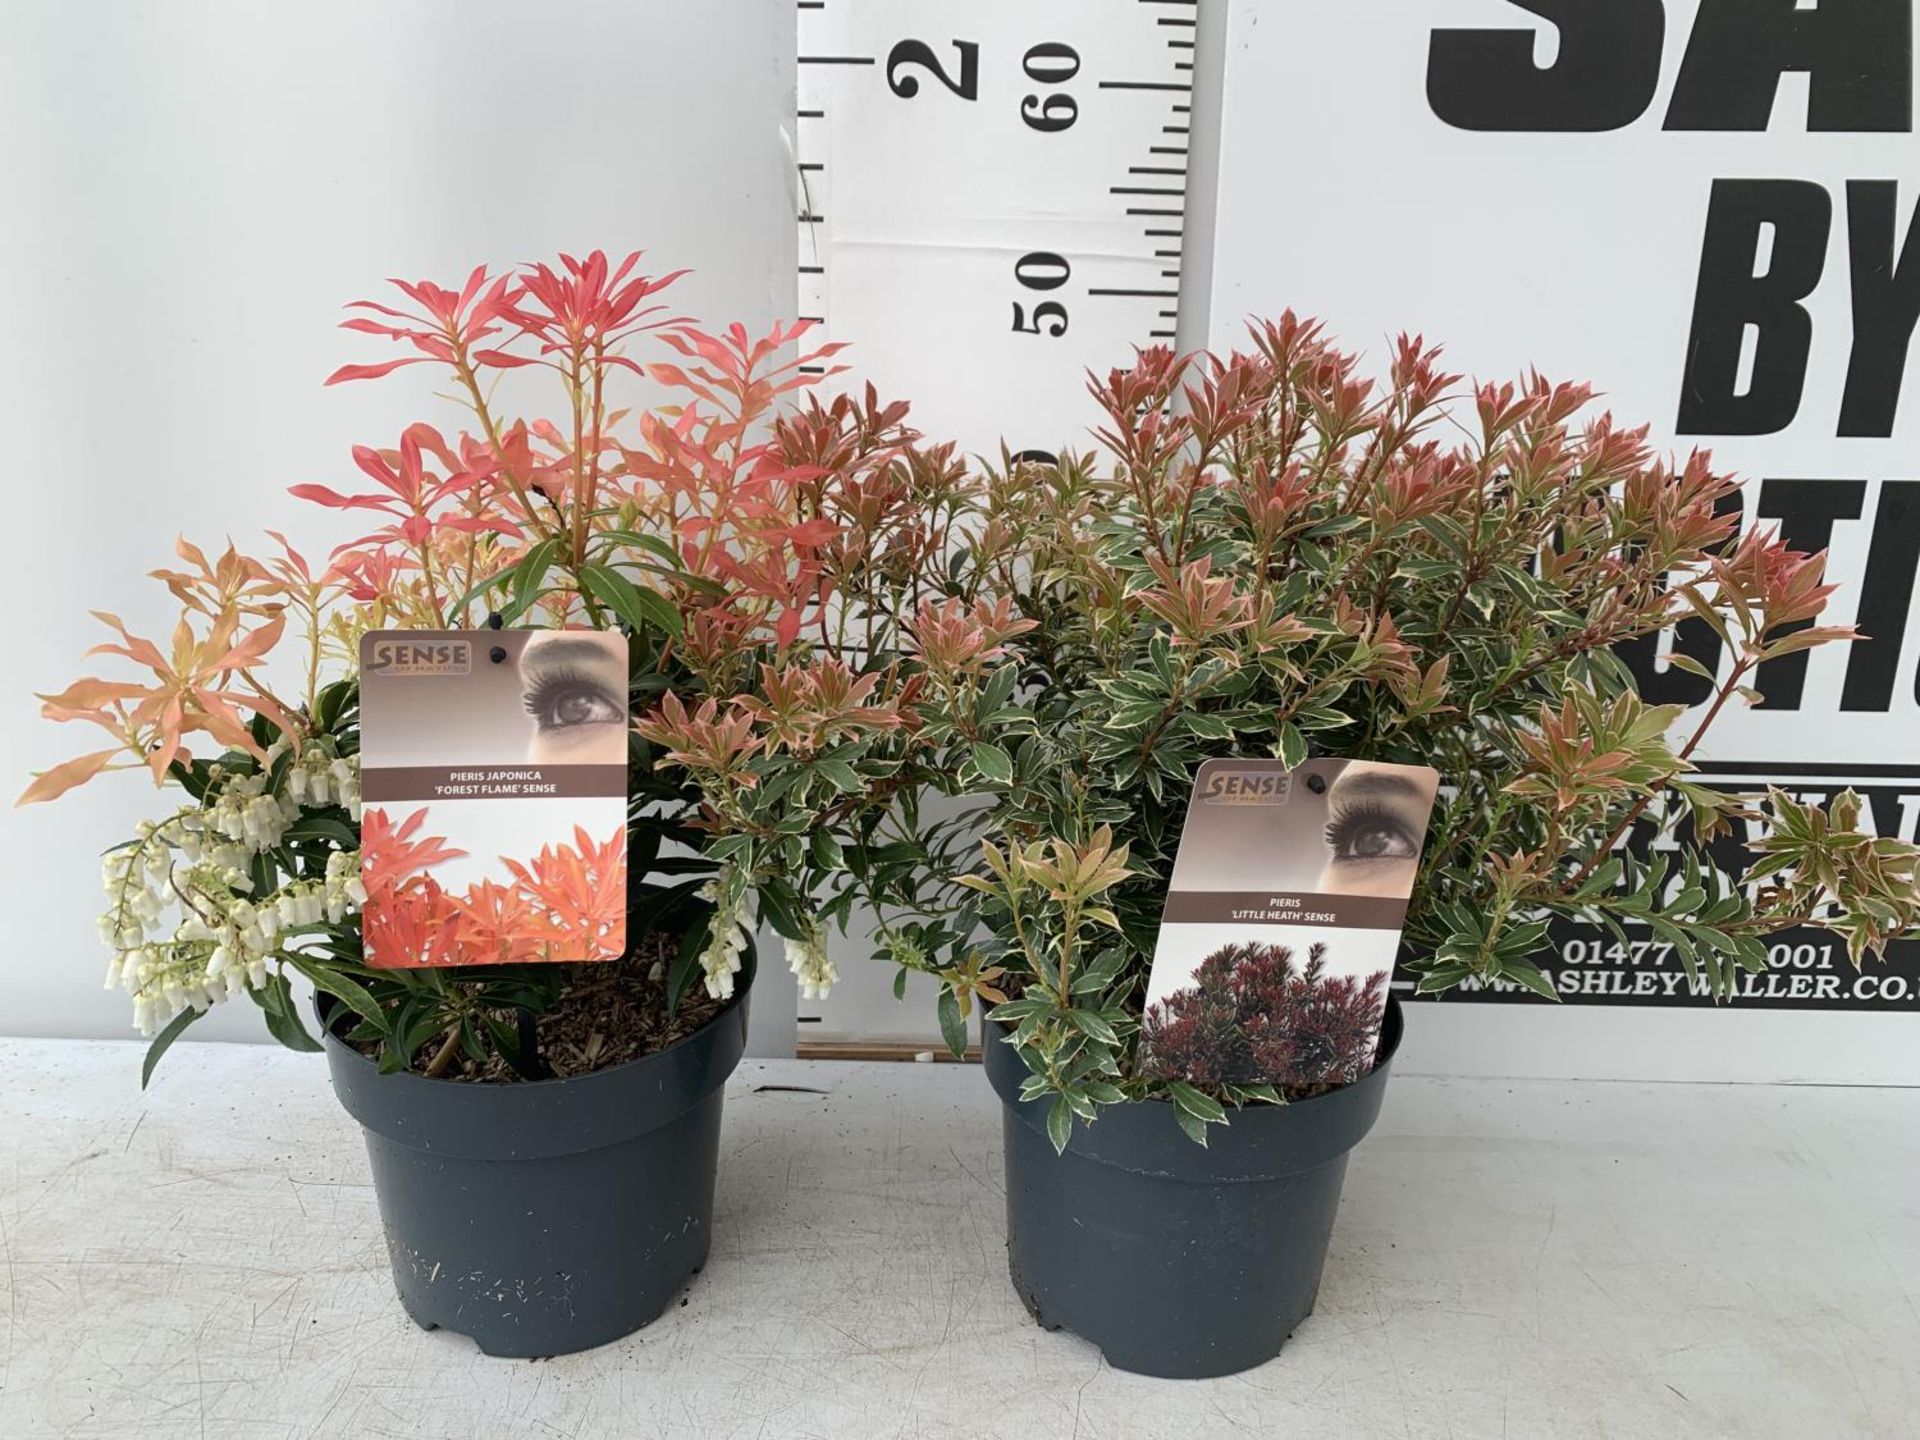 TWO PIERIS JAPONICA 'LITTLE HEATH' AND 'FOREST FLAME' IN 3 LTR POTS 50CM TALL PLUS VAT TO BE SOLD